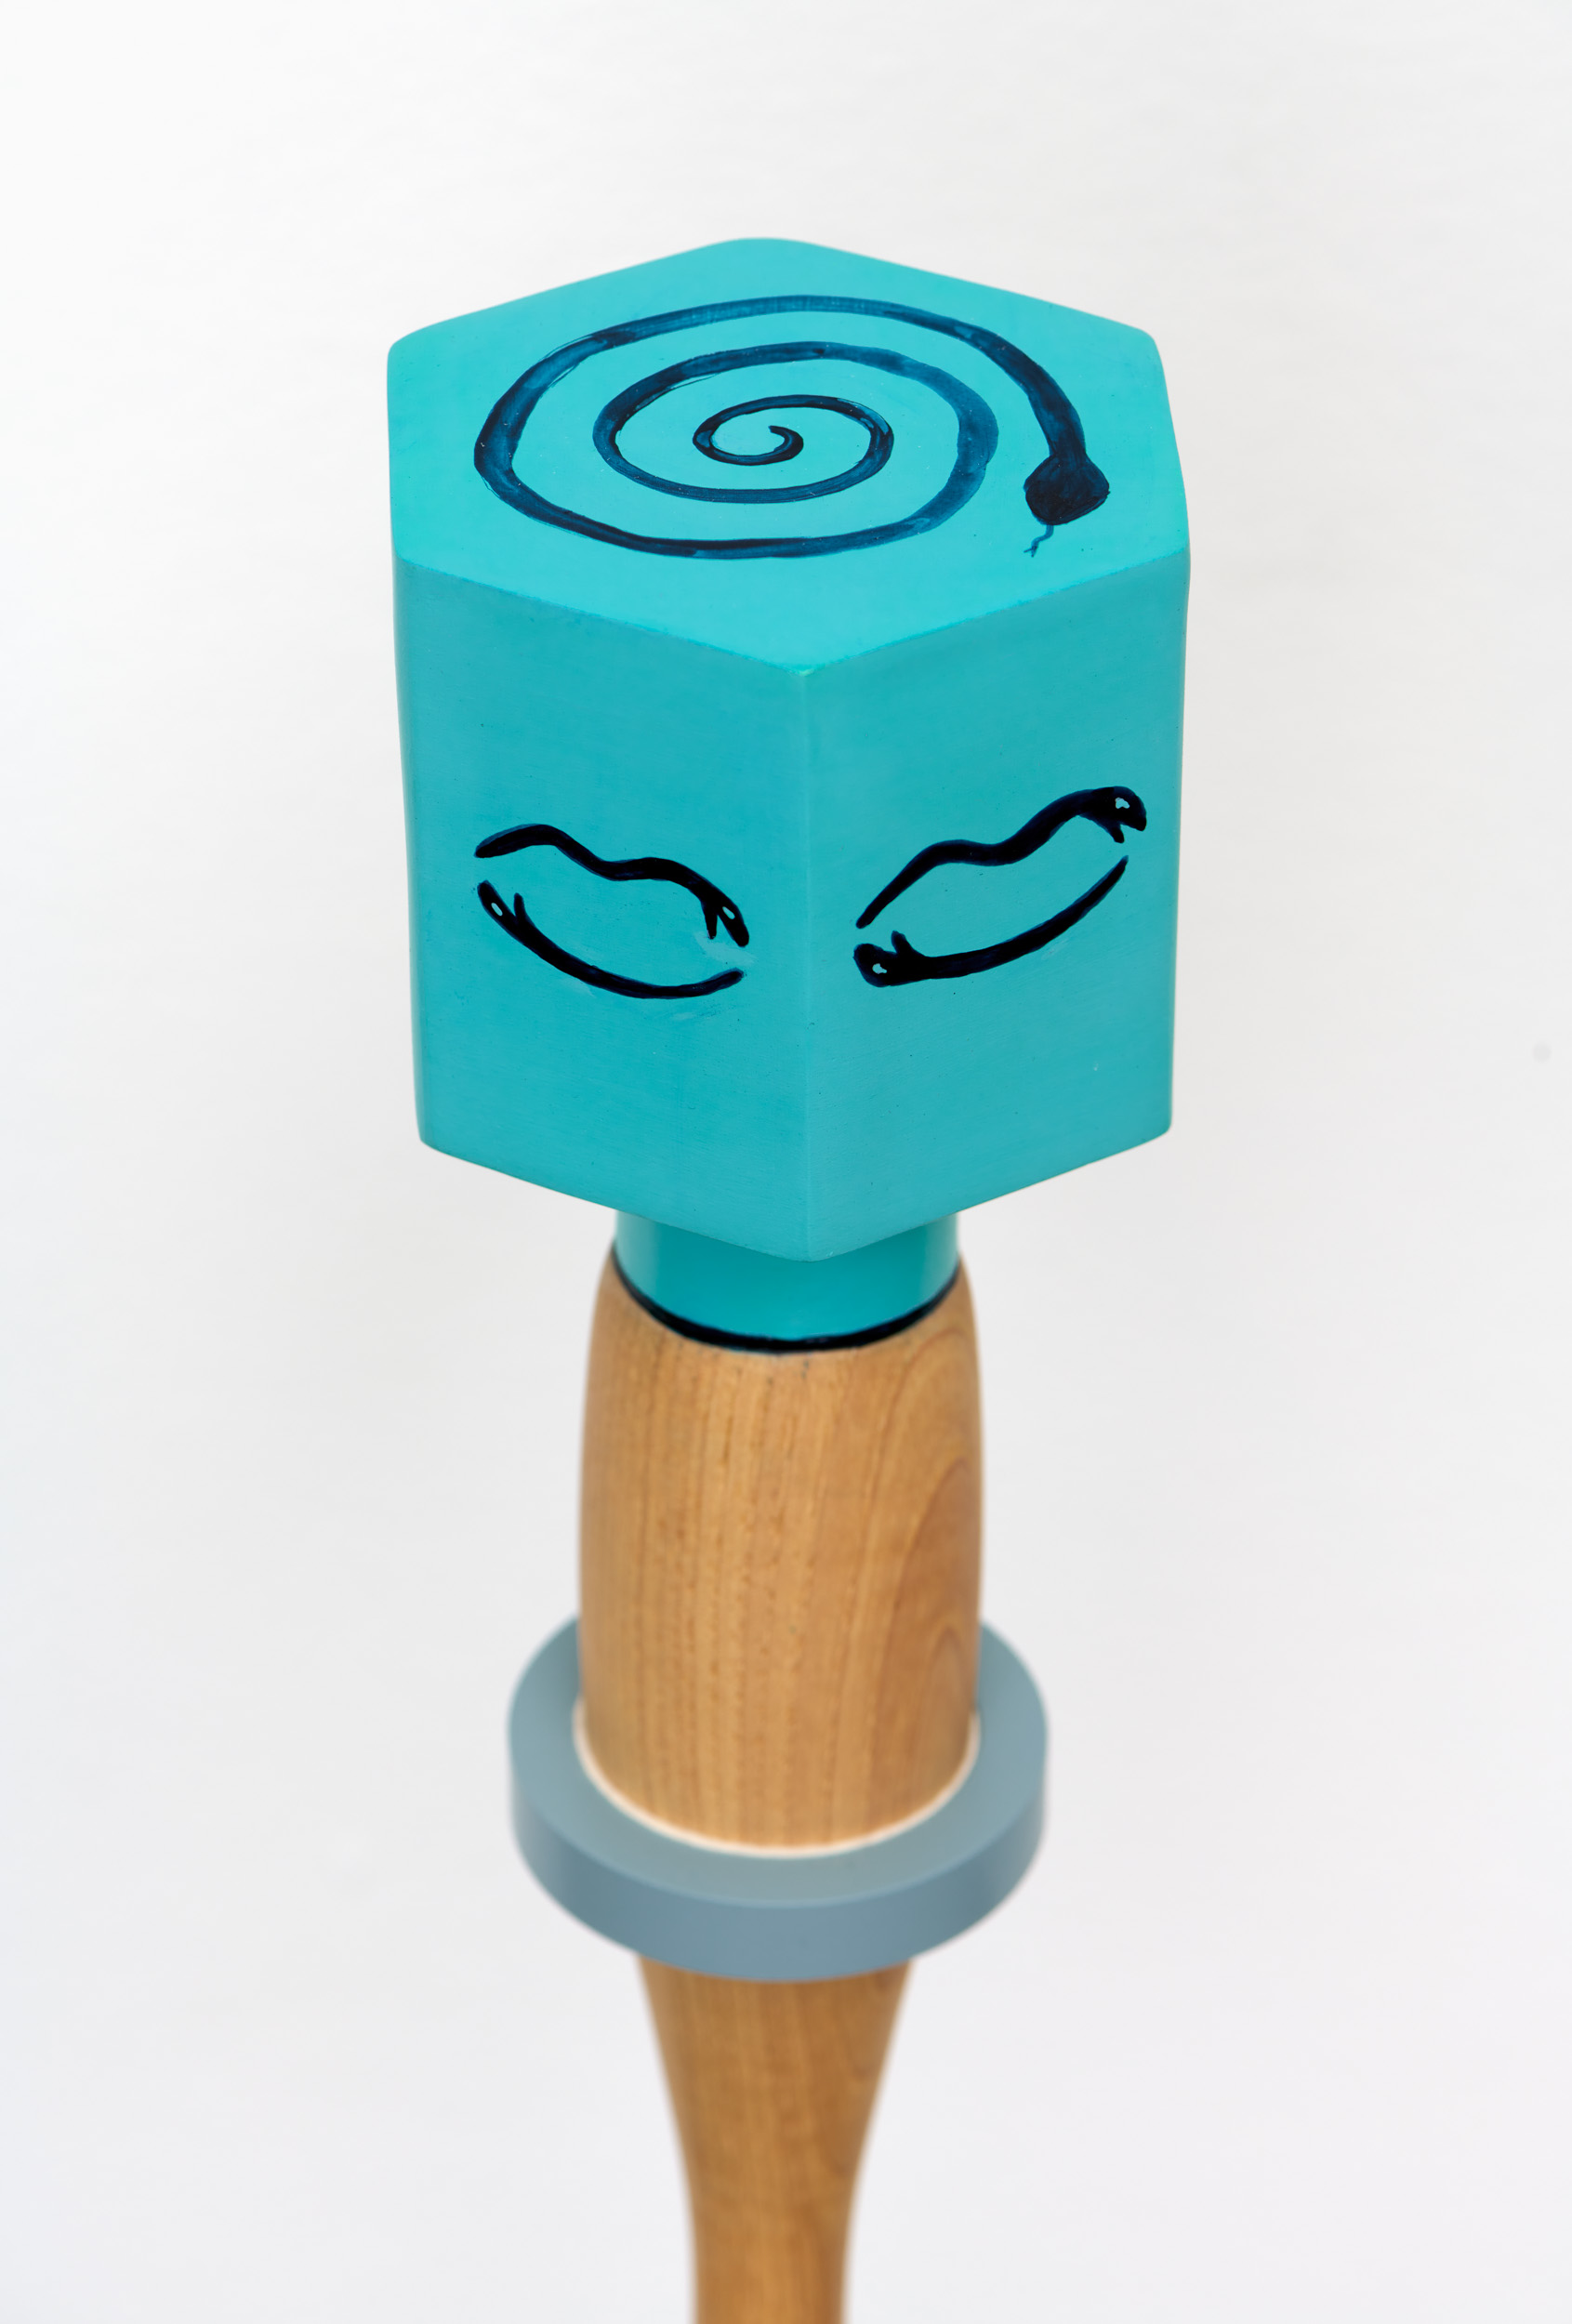 Detailed view of the top of a blue, hexagonal ceramic rattle with a wooden handle, revealing the image of a line drawing of a coiled snake on the top of the rattle.